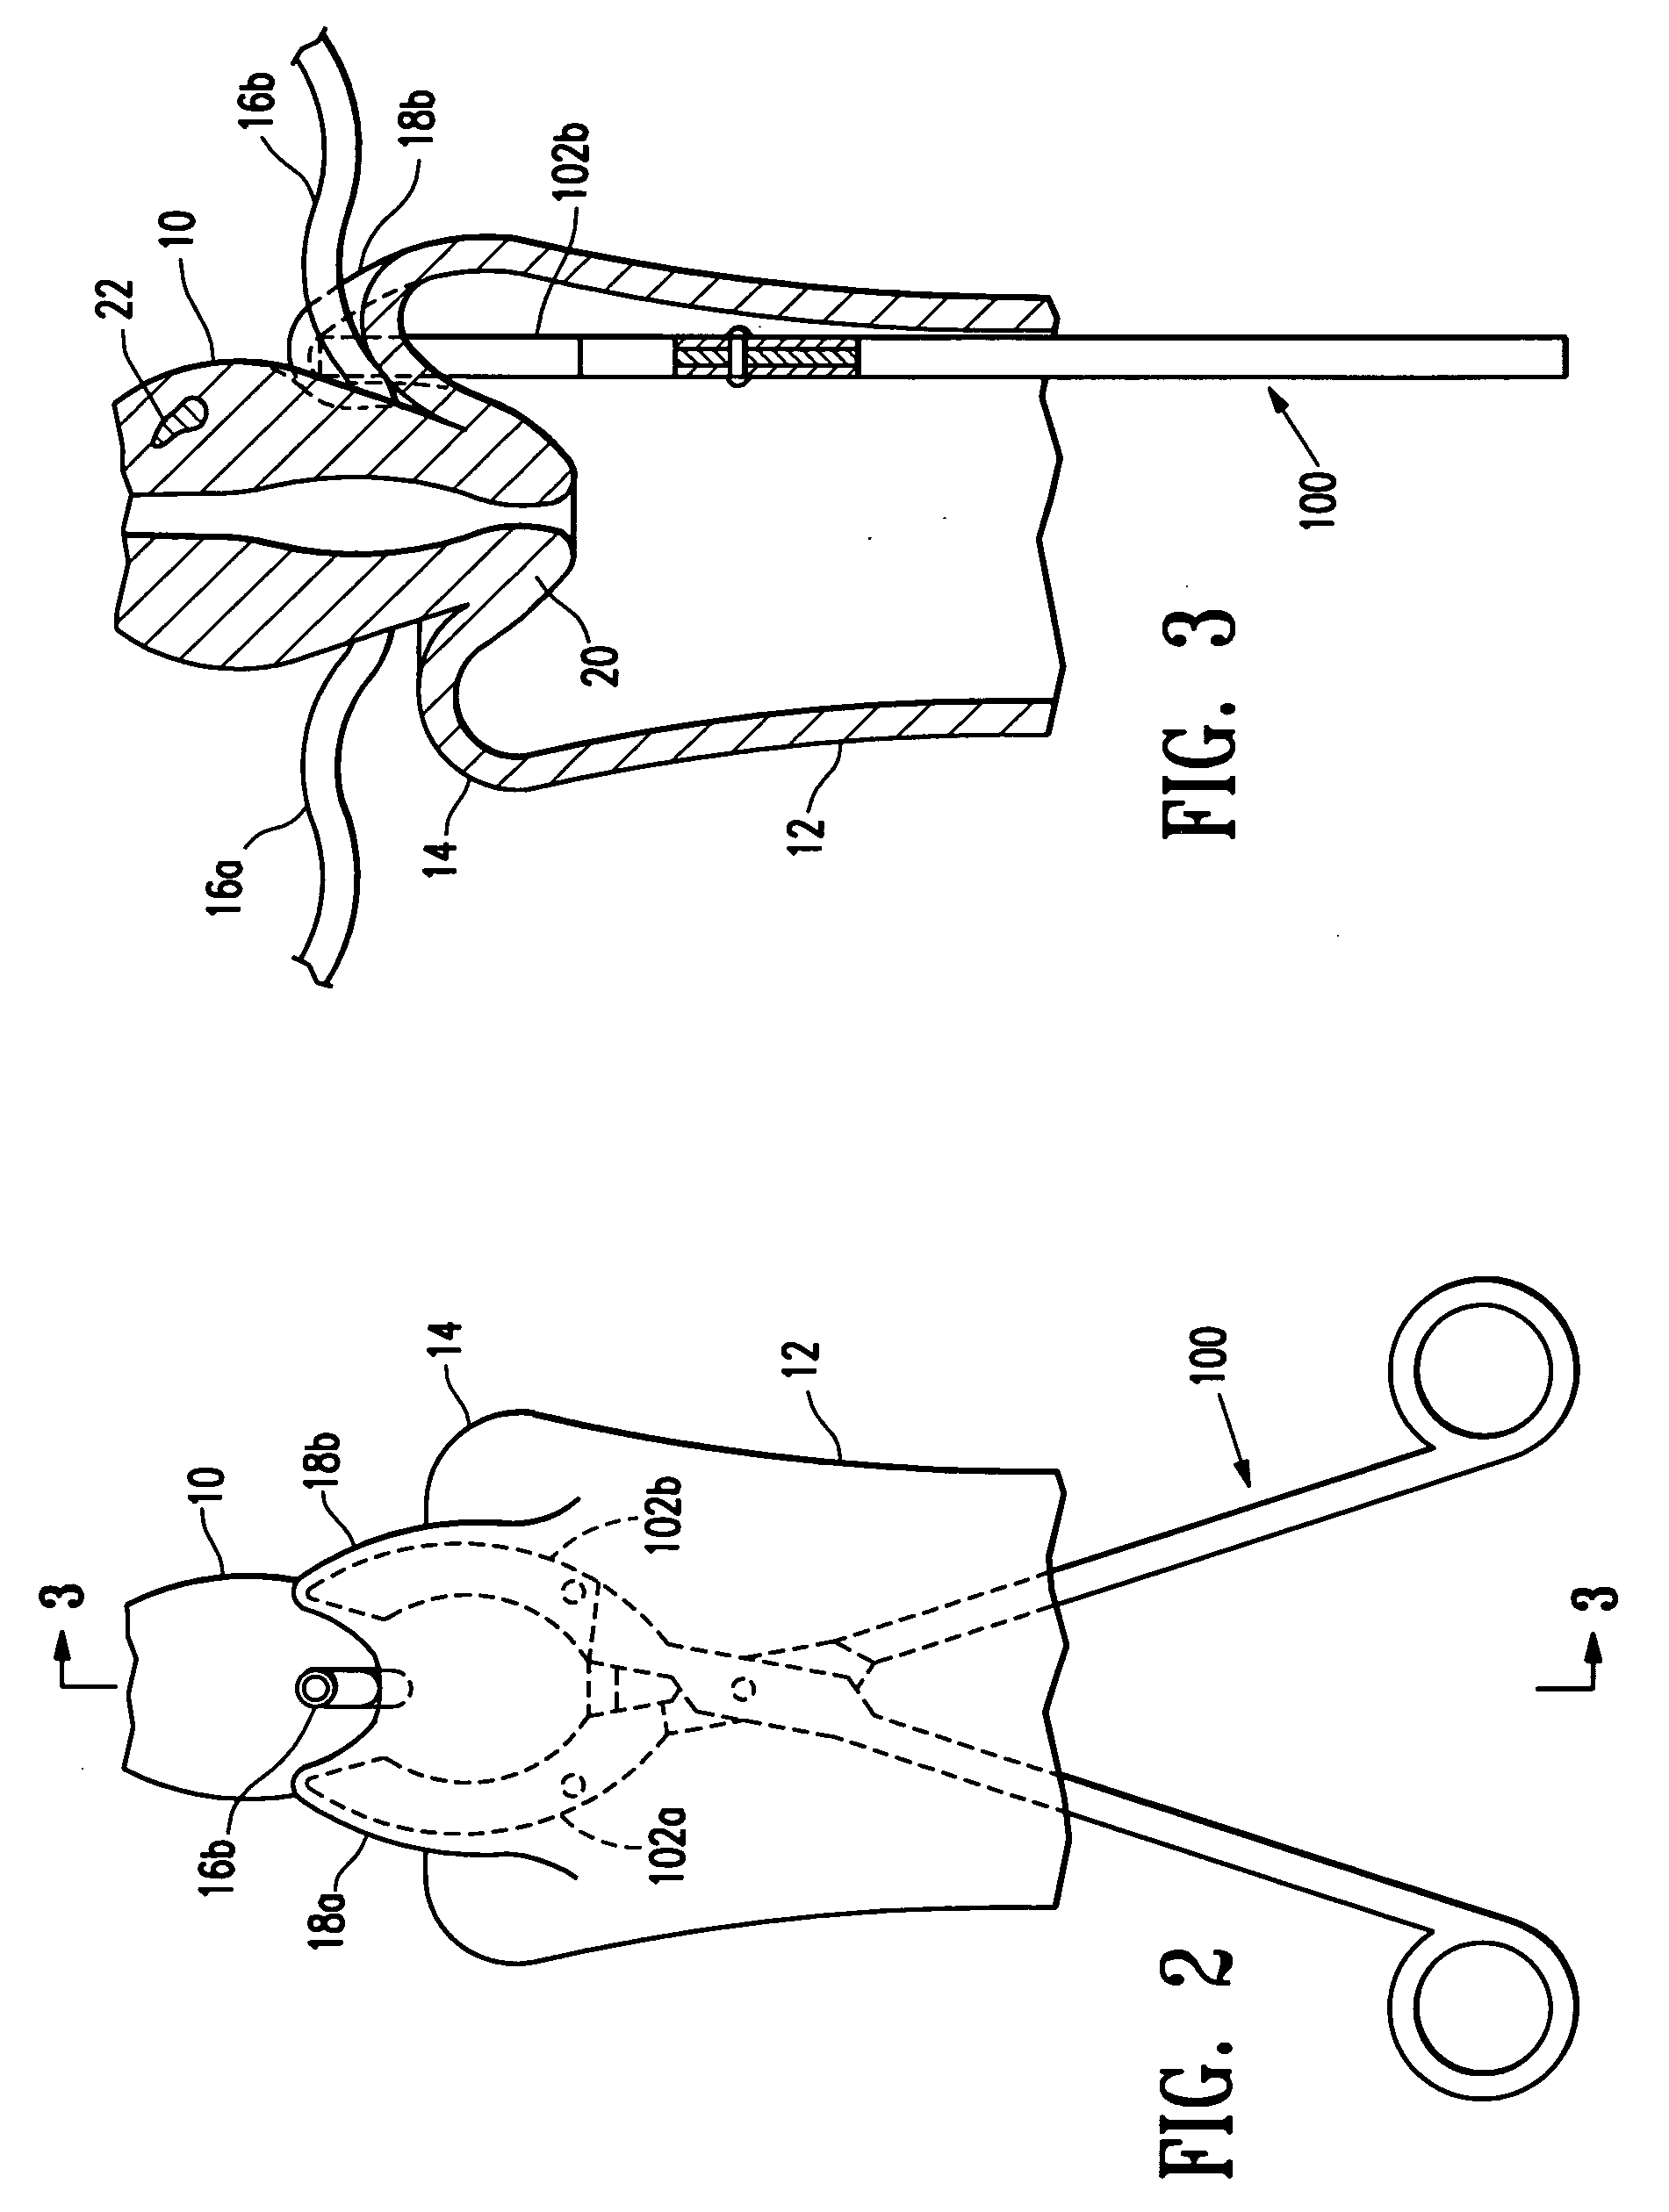 Methods for minimally invasive, non-permanent occlusion of a uterine artery